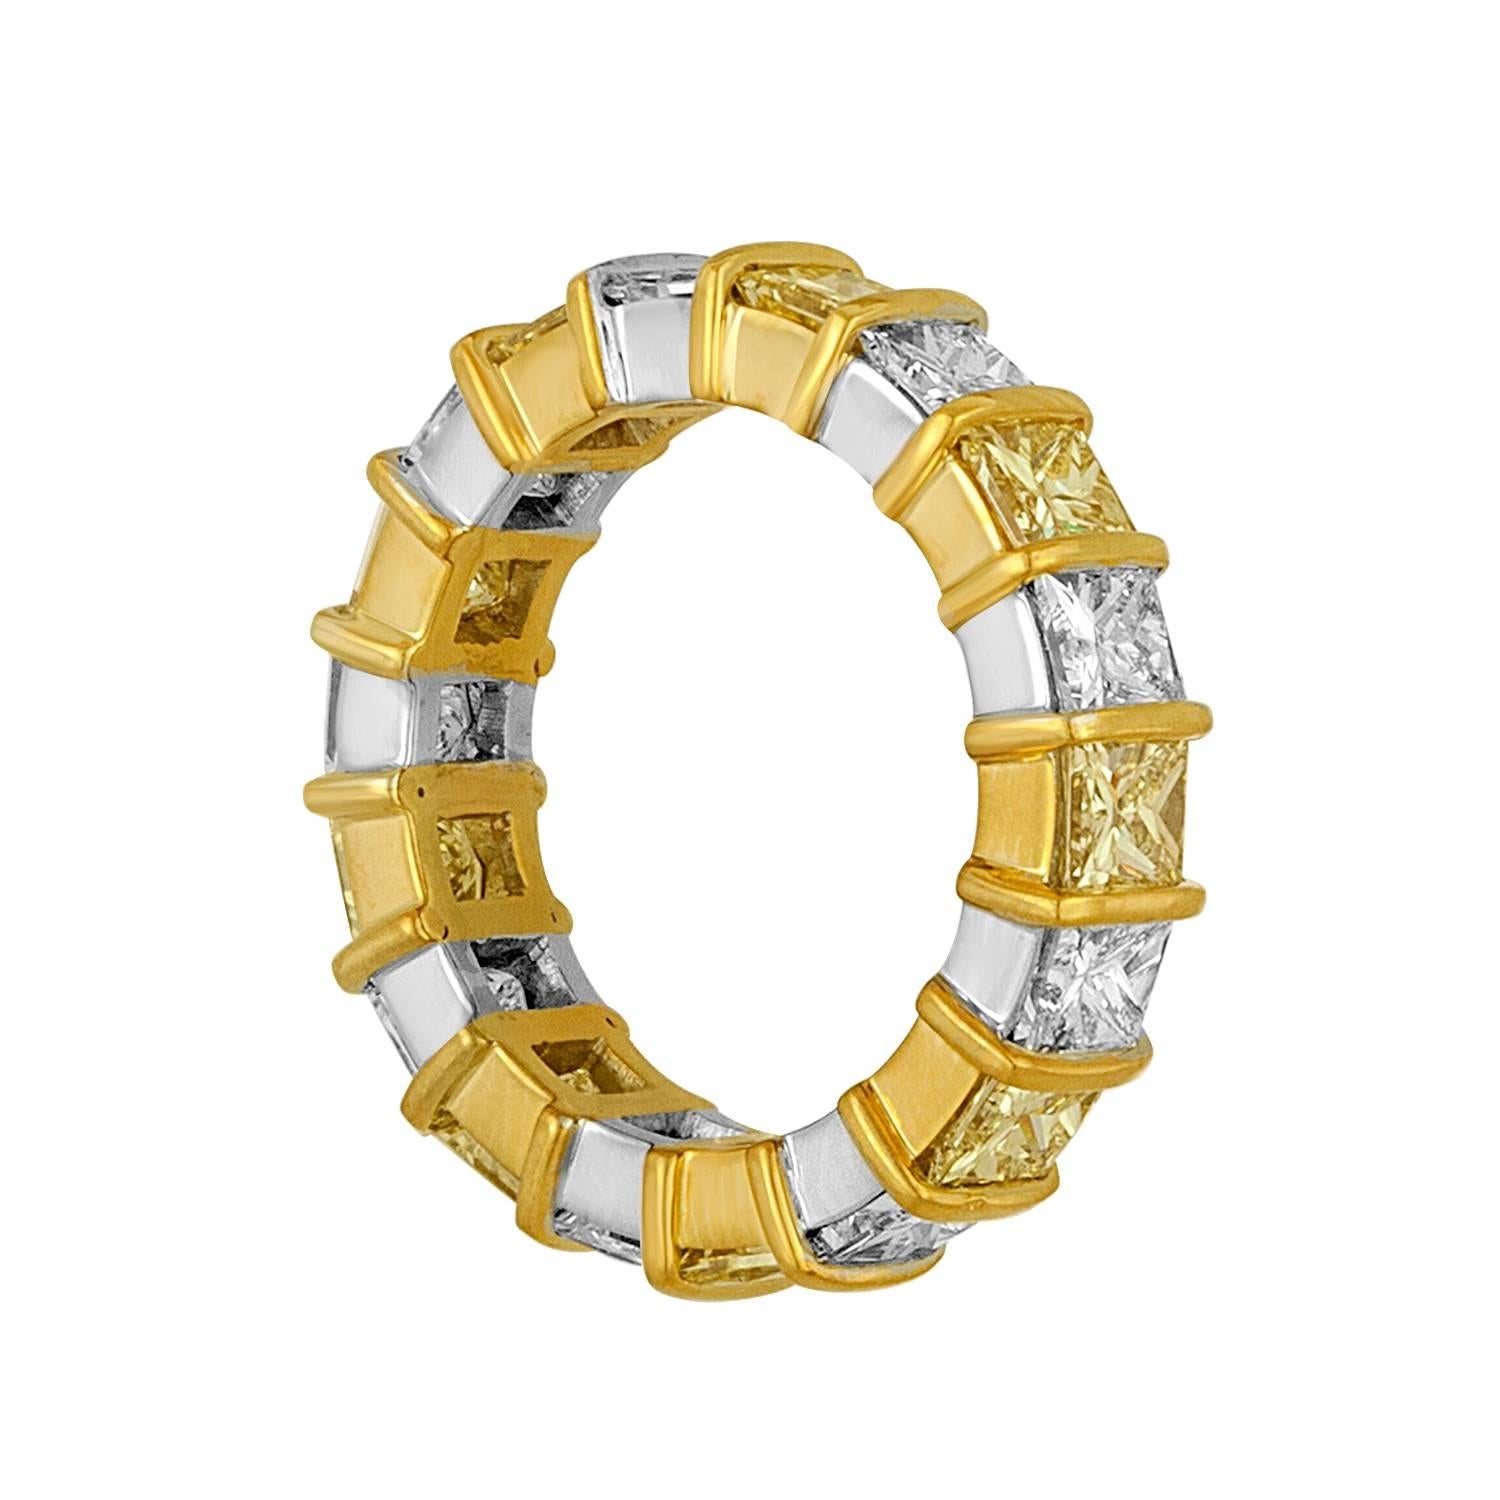 
Nine White Diamonds and Nine Yellow Diamonds are set in Two Tone Mounting as a Wedding Band.
The White Diamonds are Estimated to be G in Color and VS Type Clarity. The White Diamonds are Estimated to be 3.25 Carat Total Weight.
The Yellow